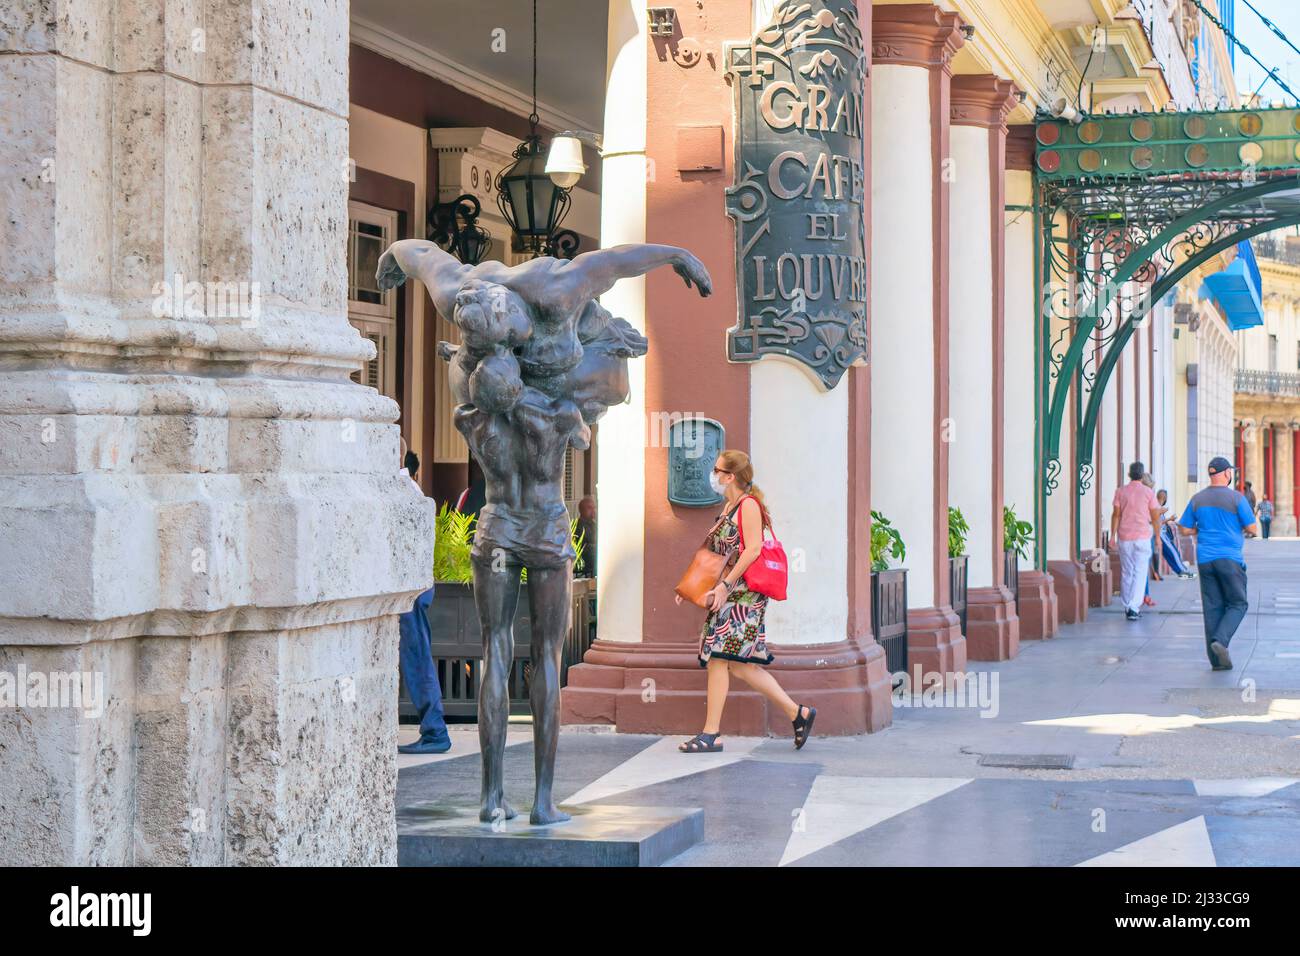 Metallic sculpture or urban art in the sidewalk of the famous Gran Cafe El Louvre in the central district of Havana city. This area is a famous place Stock Photo